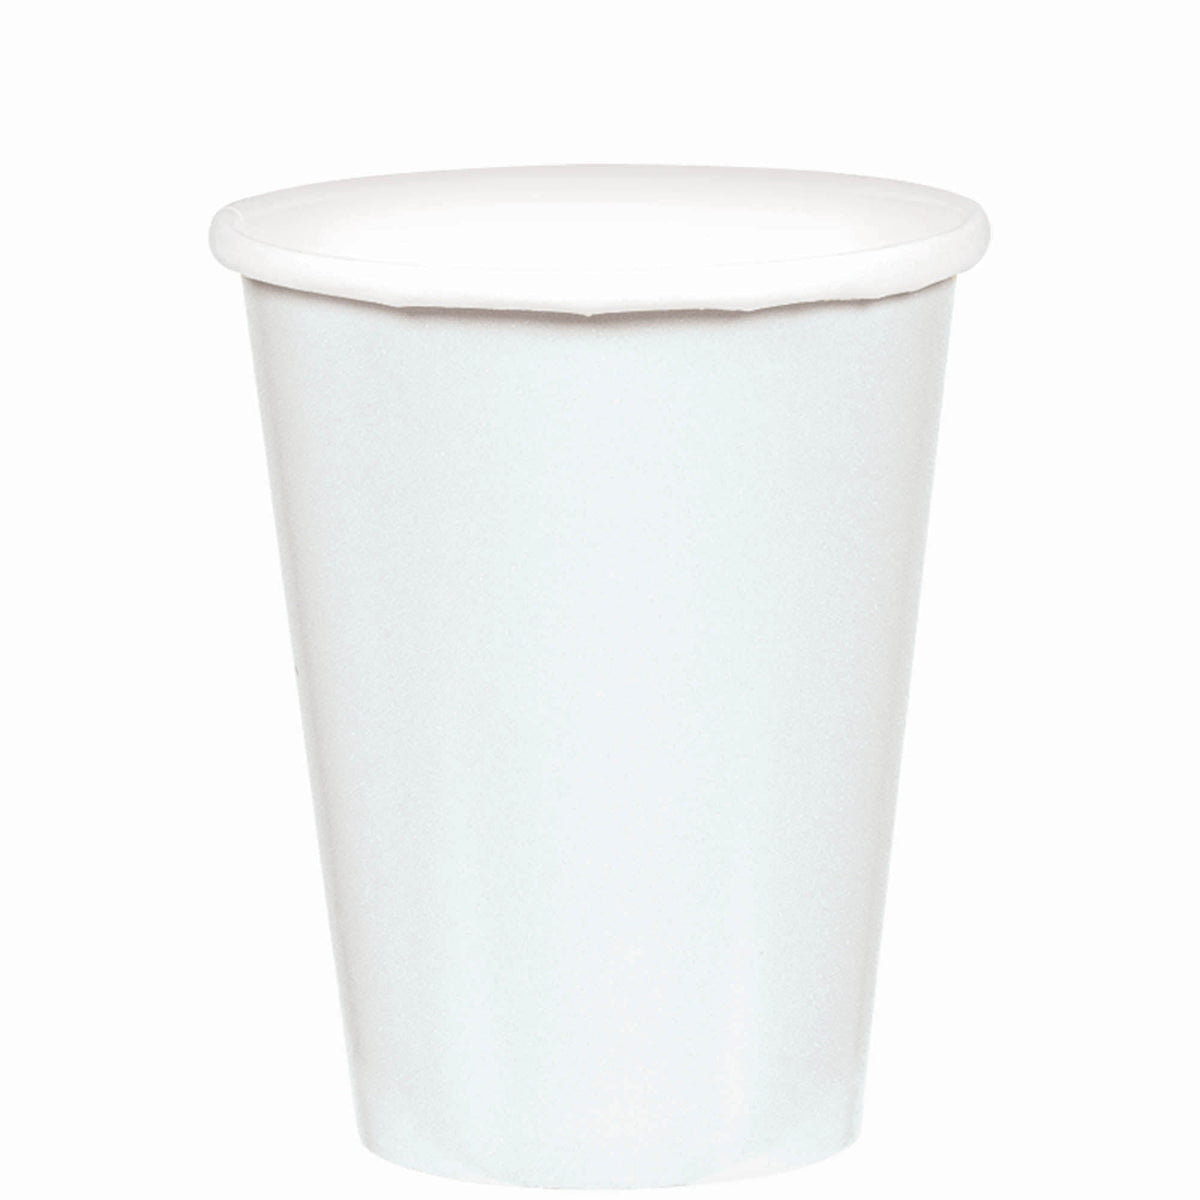 Frosty White 9 oz. Paper Cups, 20 count